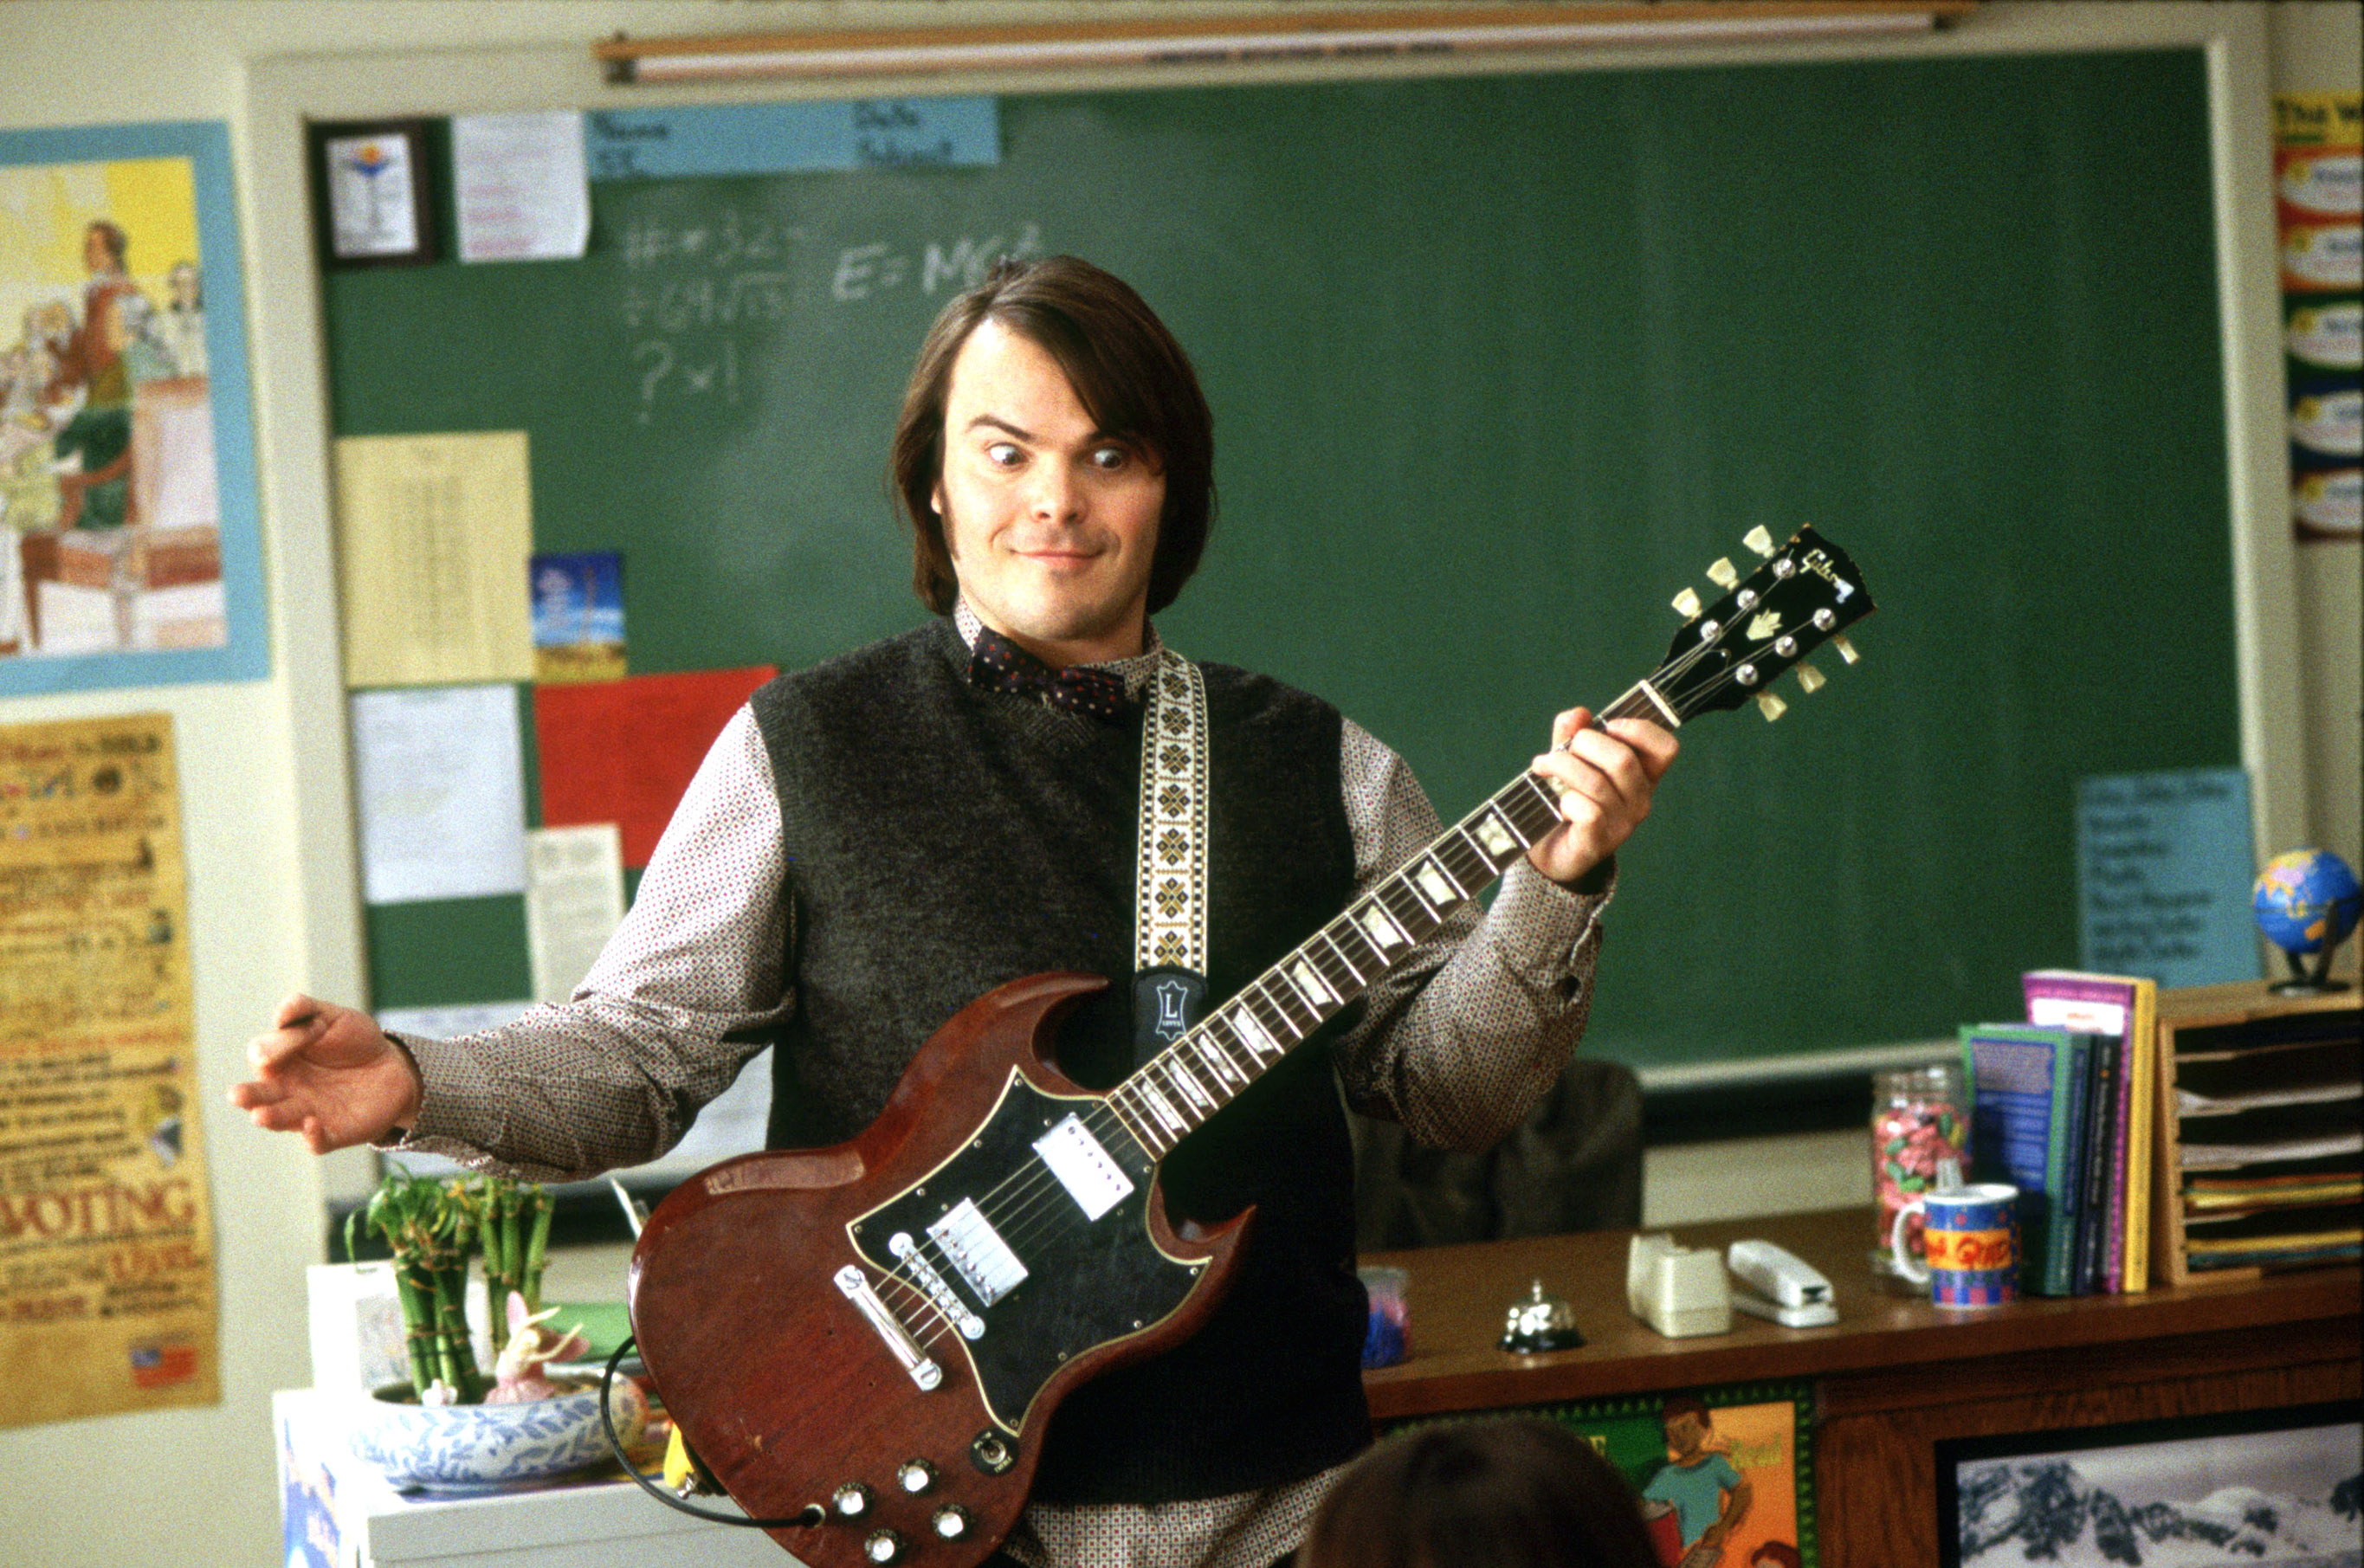 Jack Black with his arms open brandishing a guitar